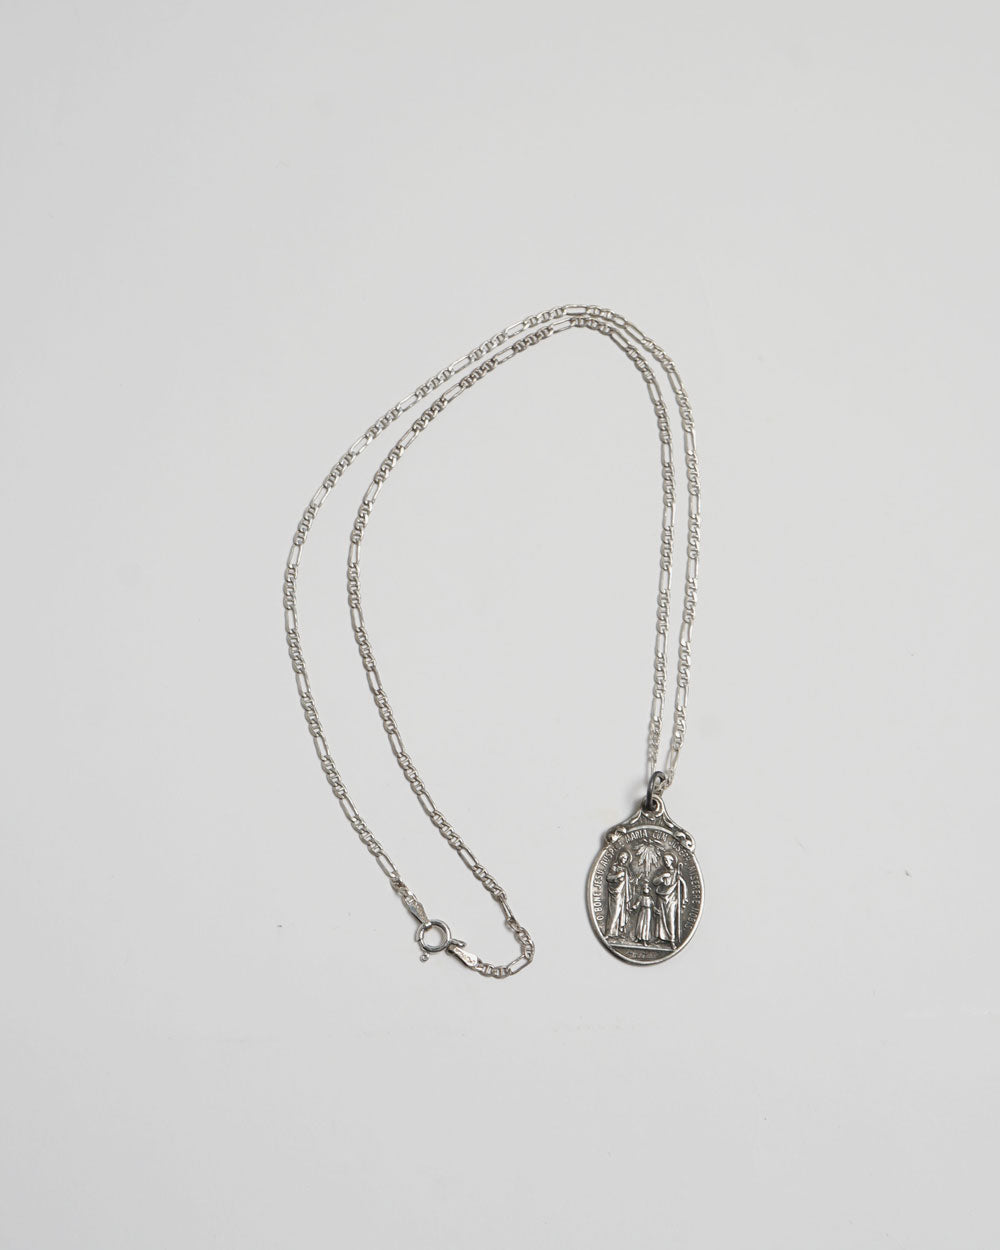 Silver Chain Necklace w/ Religious Charm